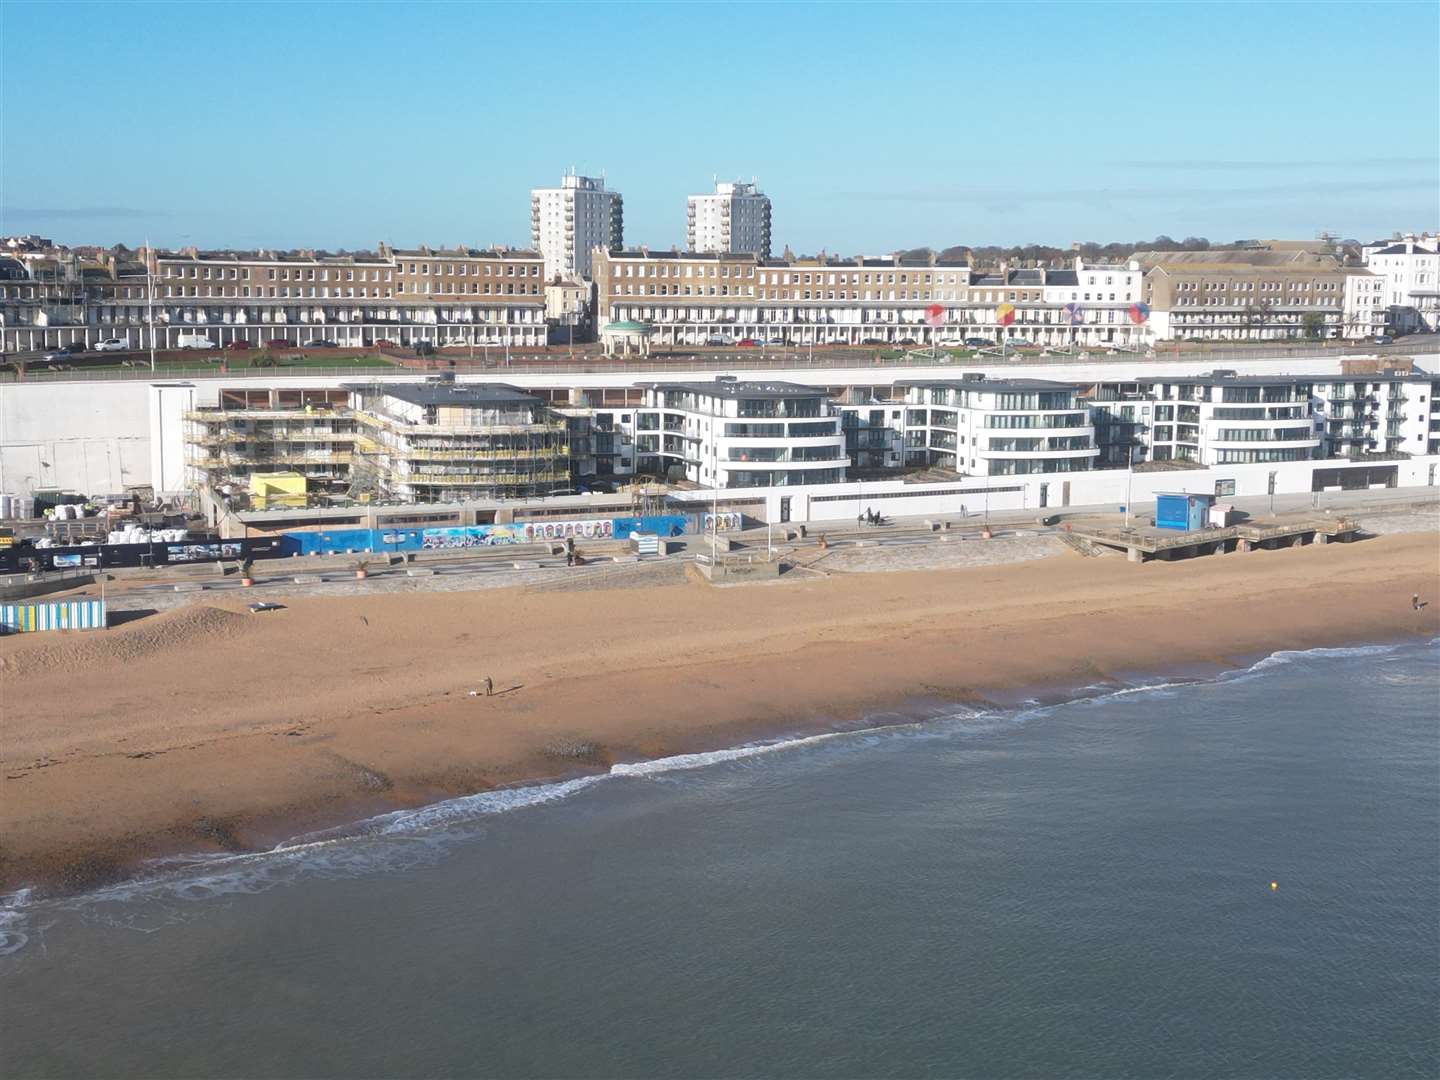 The Royal Sands development on Ramsgate seafront. Picture: Barry Goodwin